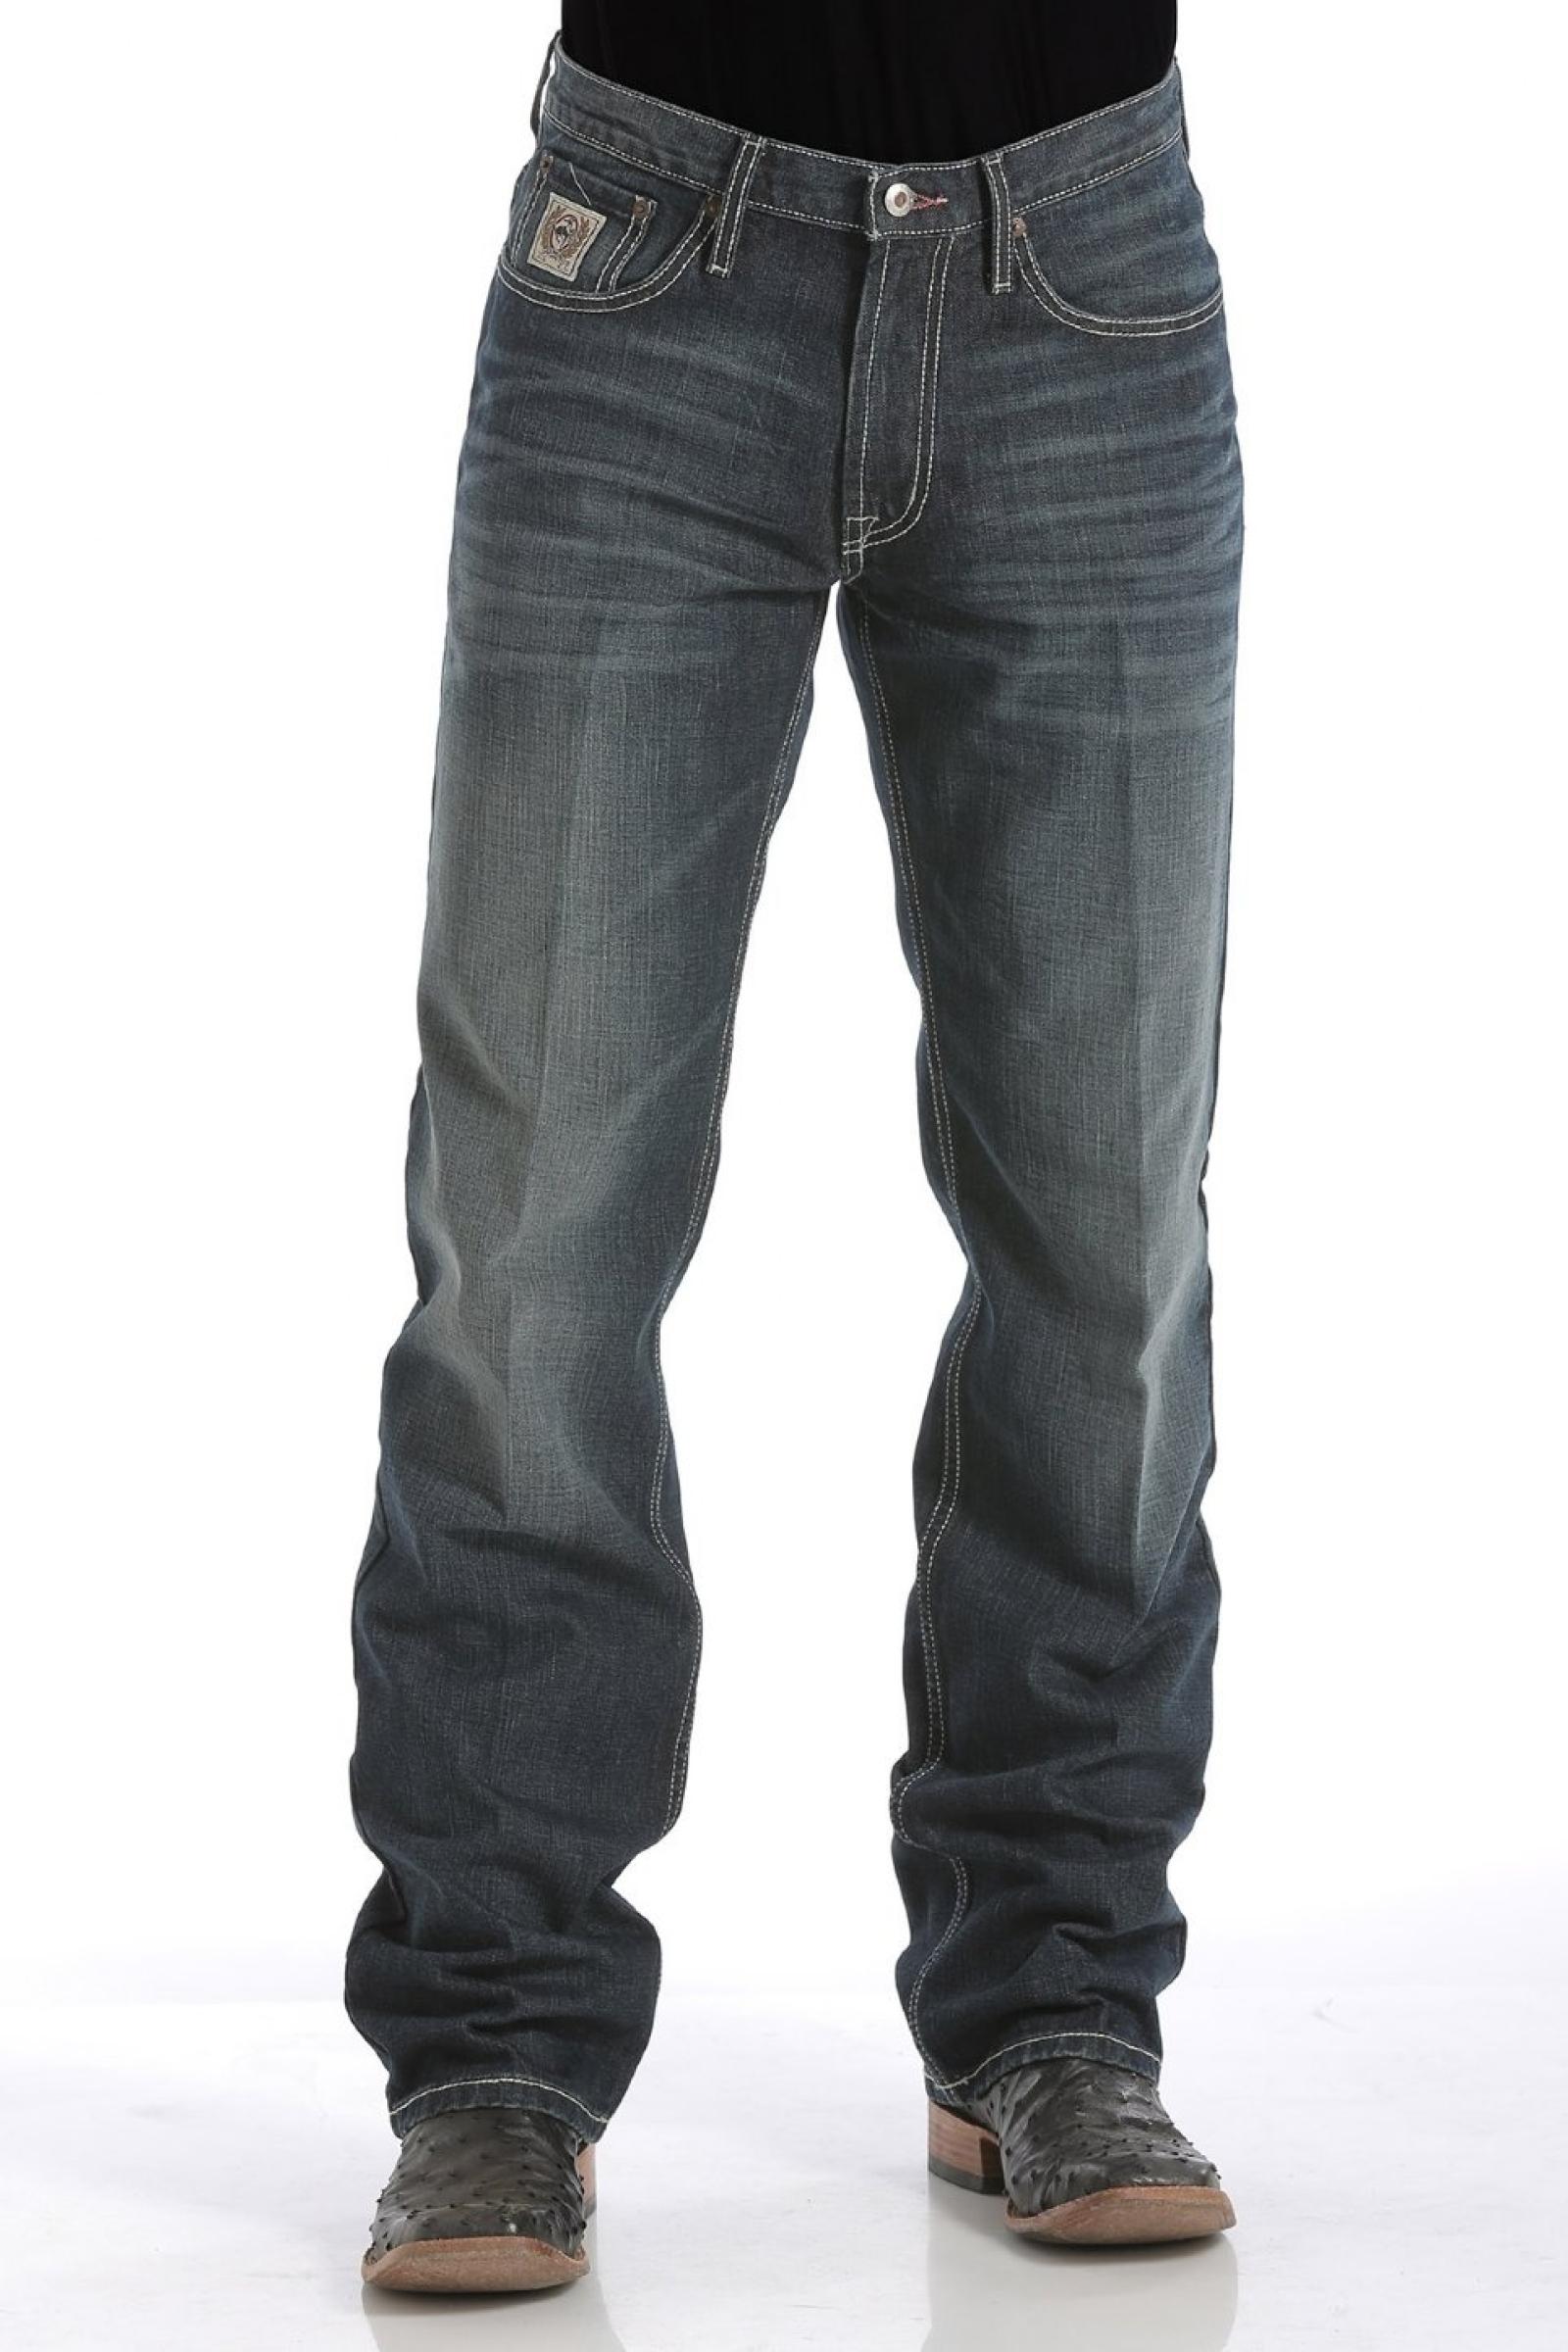 Cinch Men's Relaxed Fit White Label Jeans